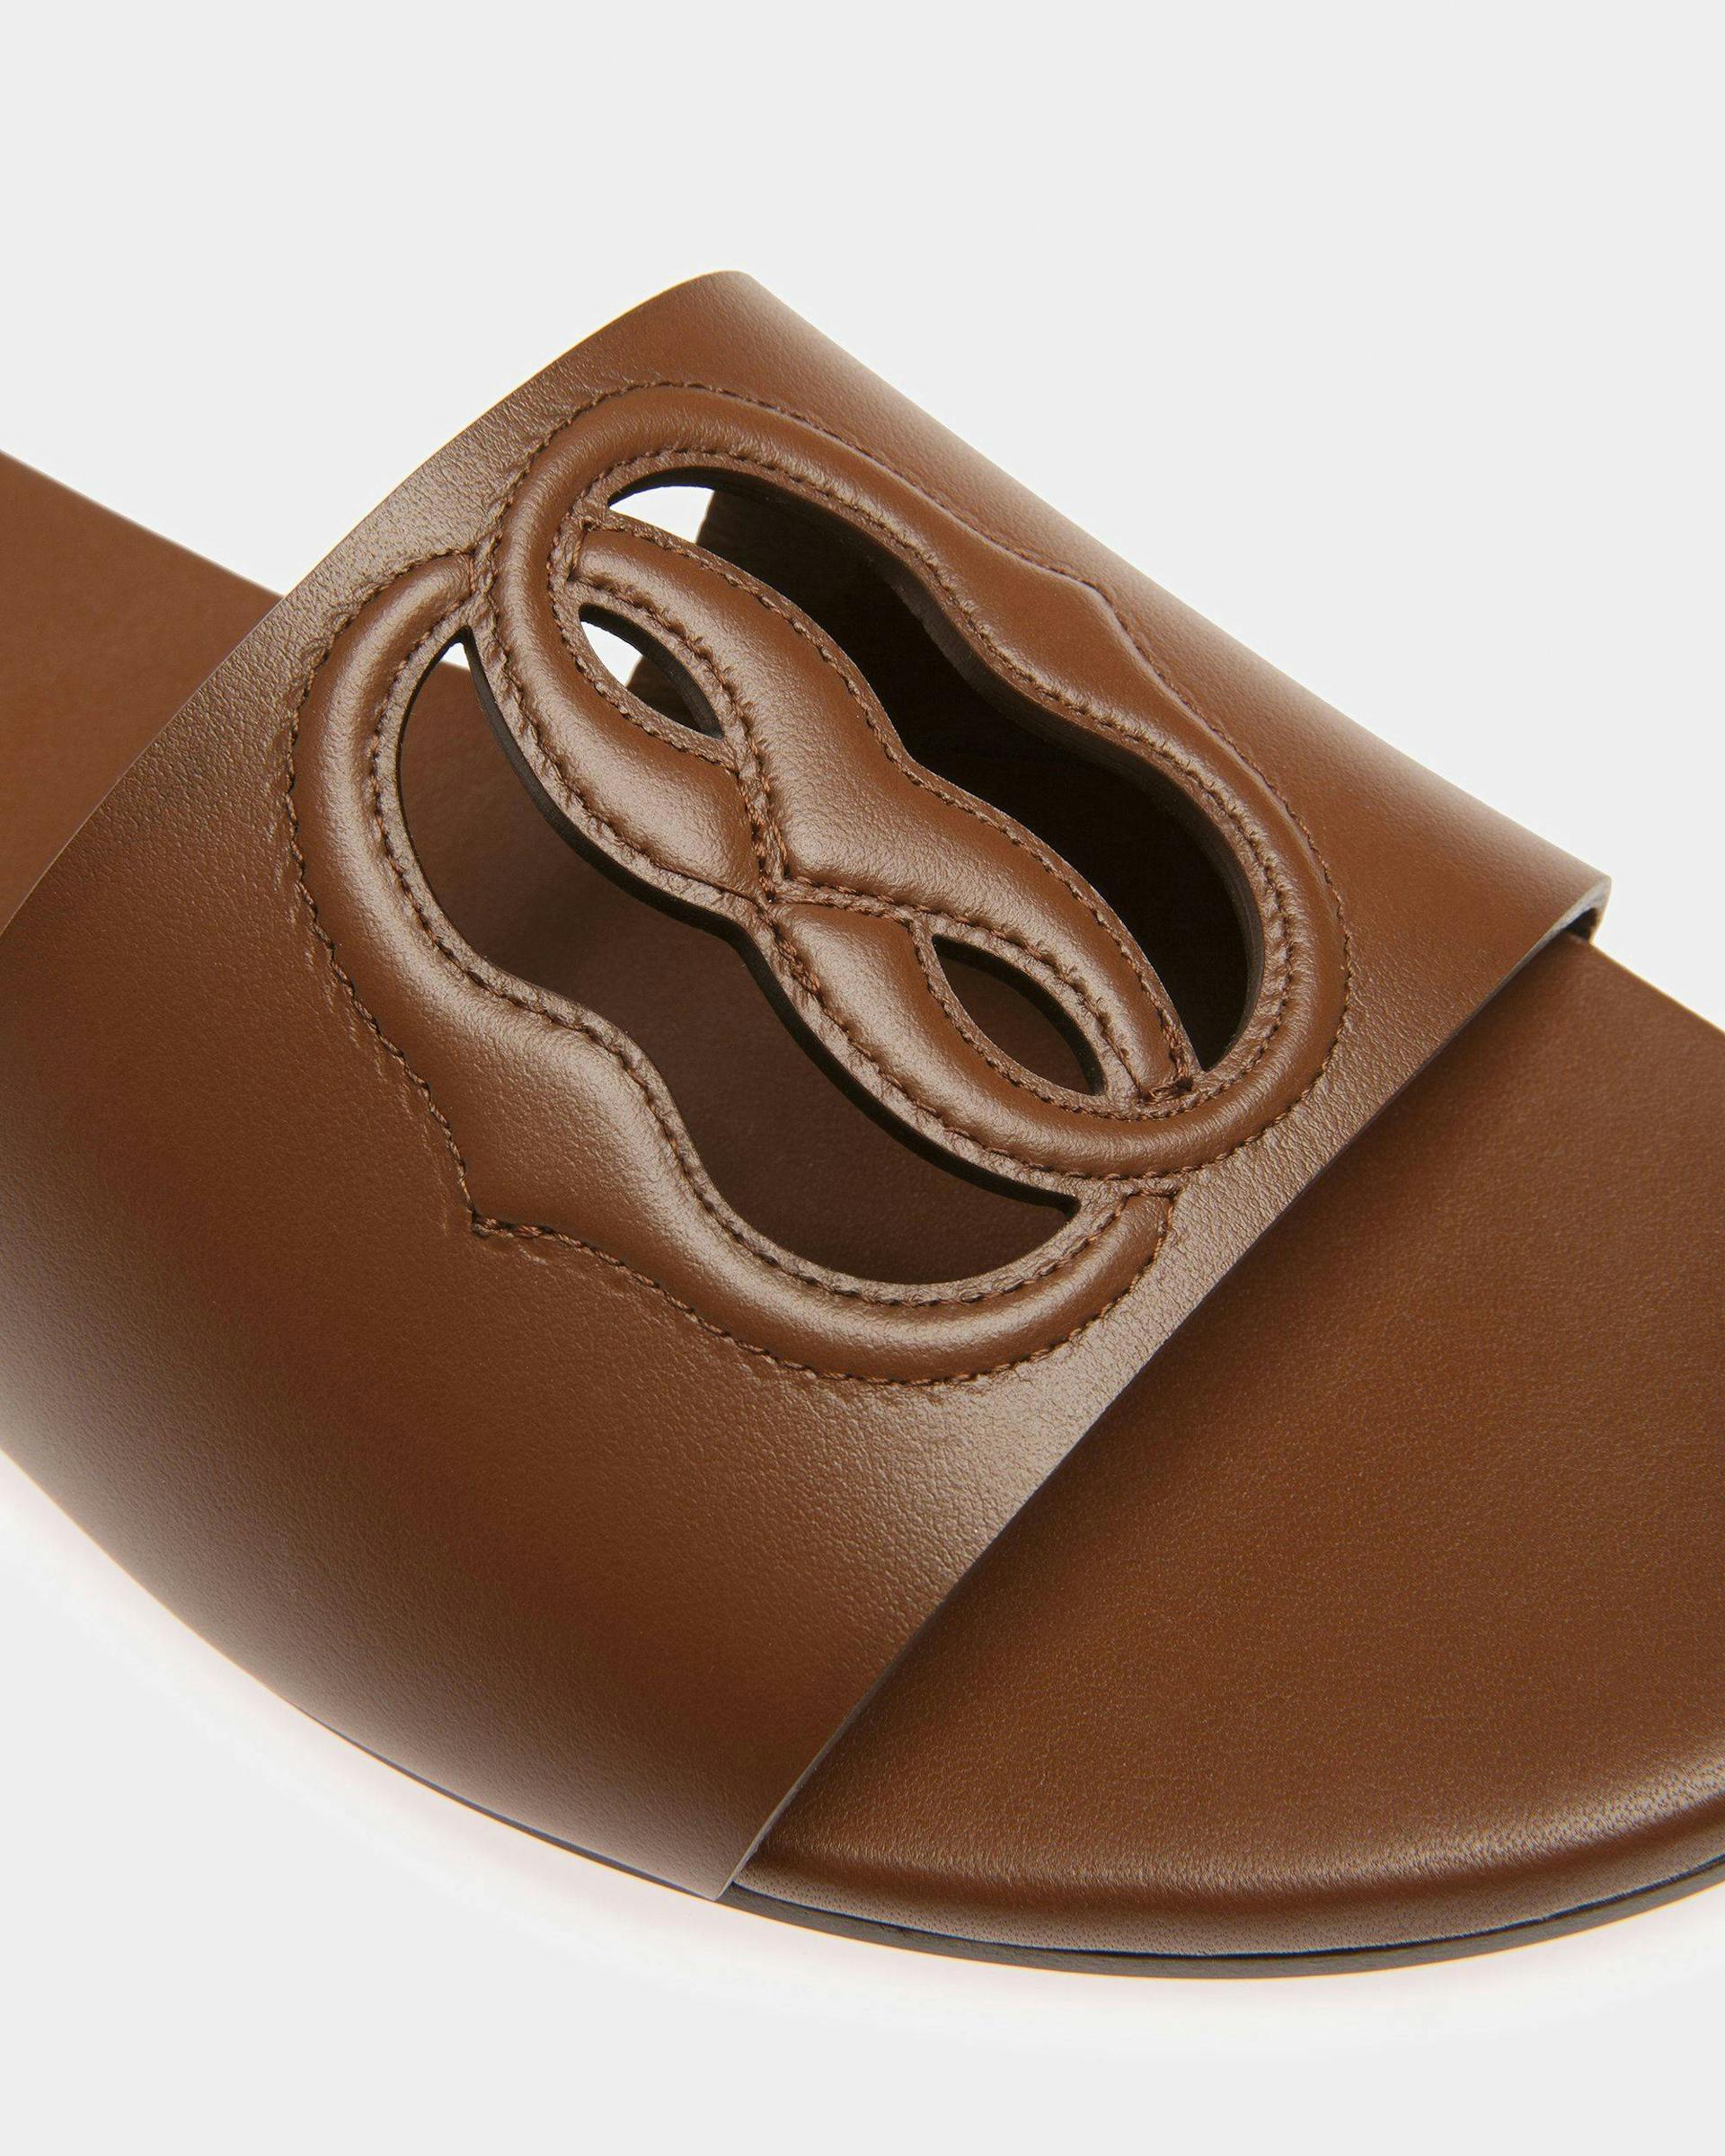 Emblem Slides In Brown Leather - Women's - Bally - 04